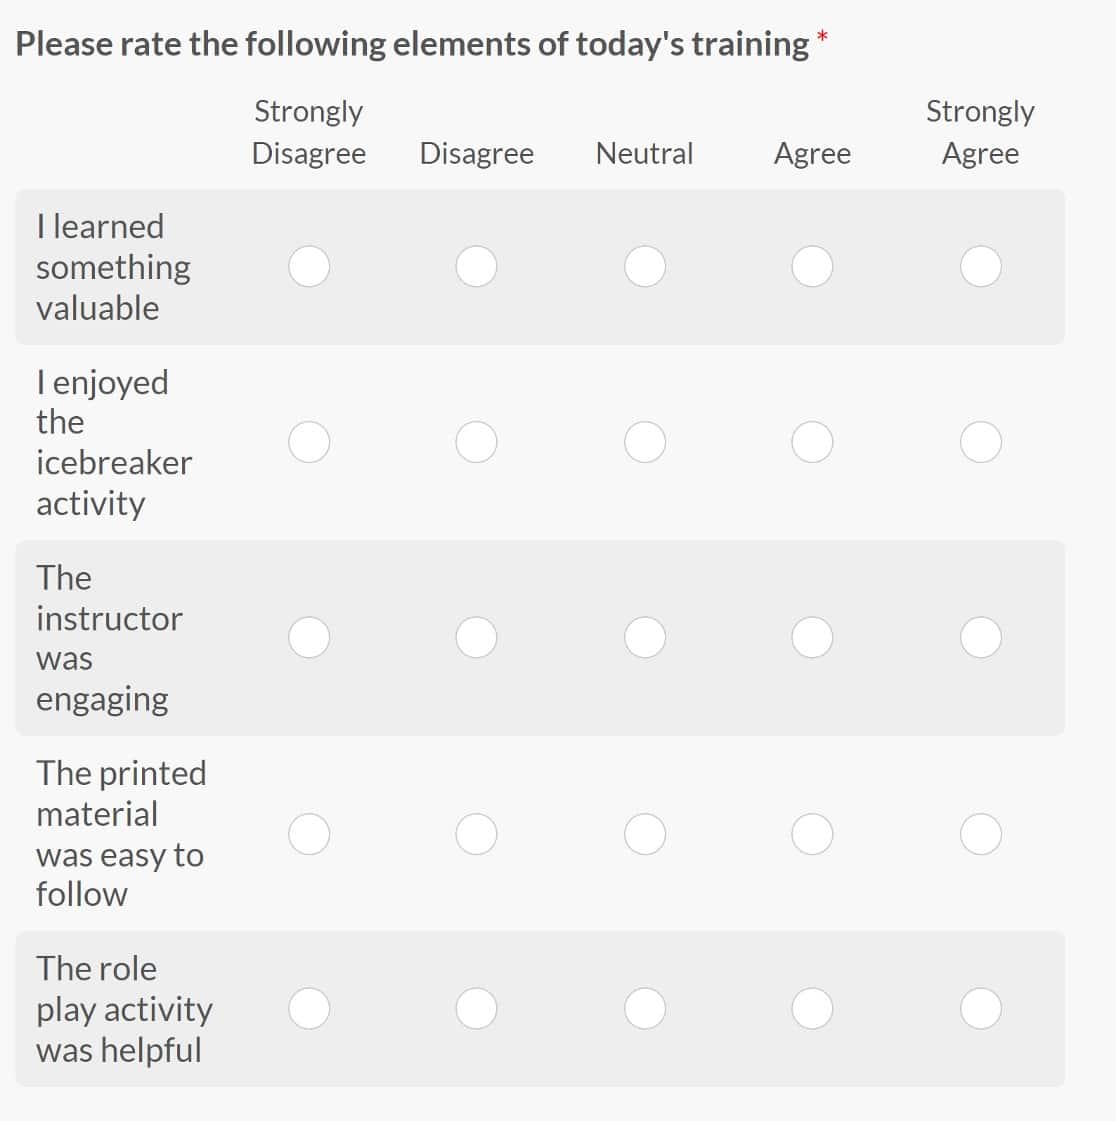 training course likert scale